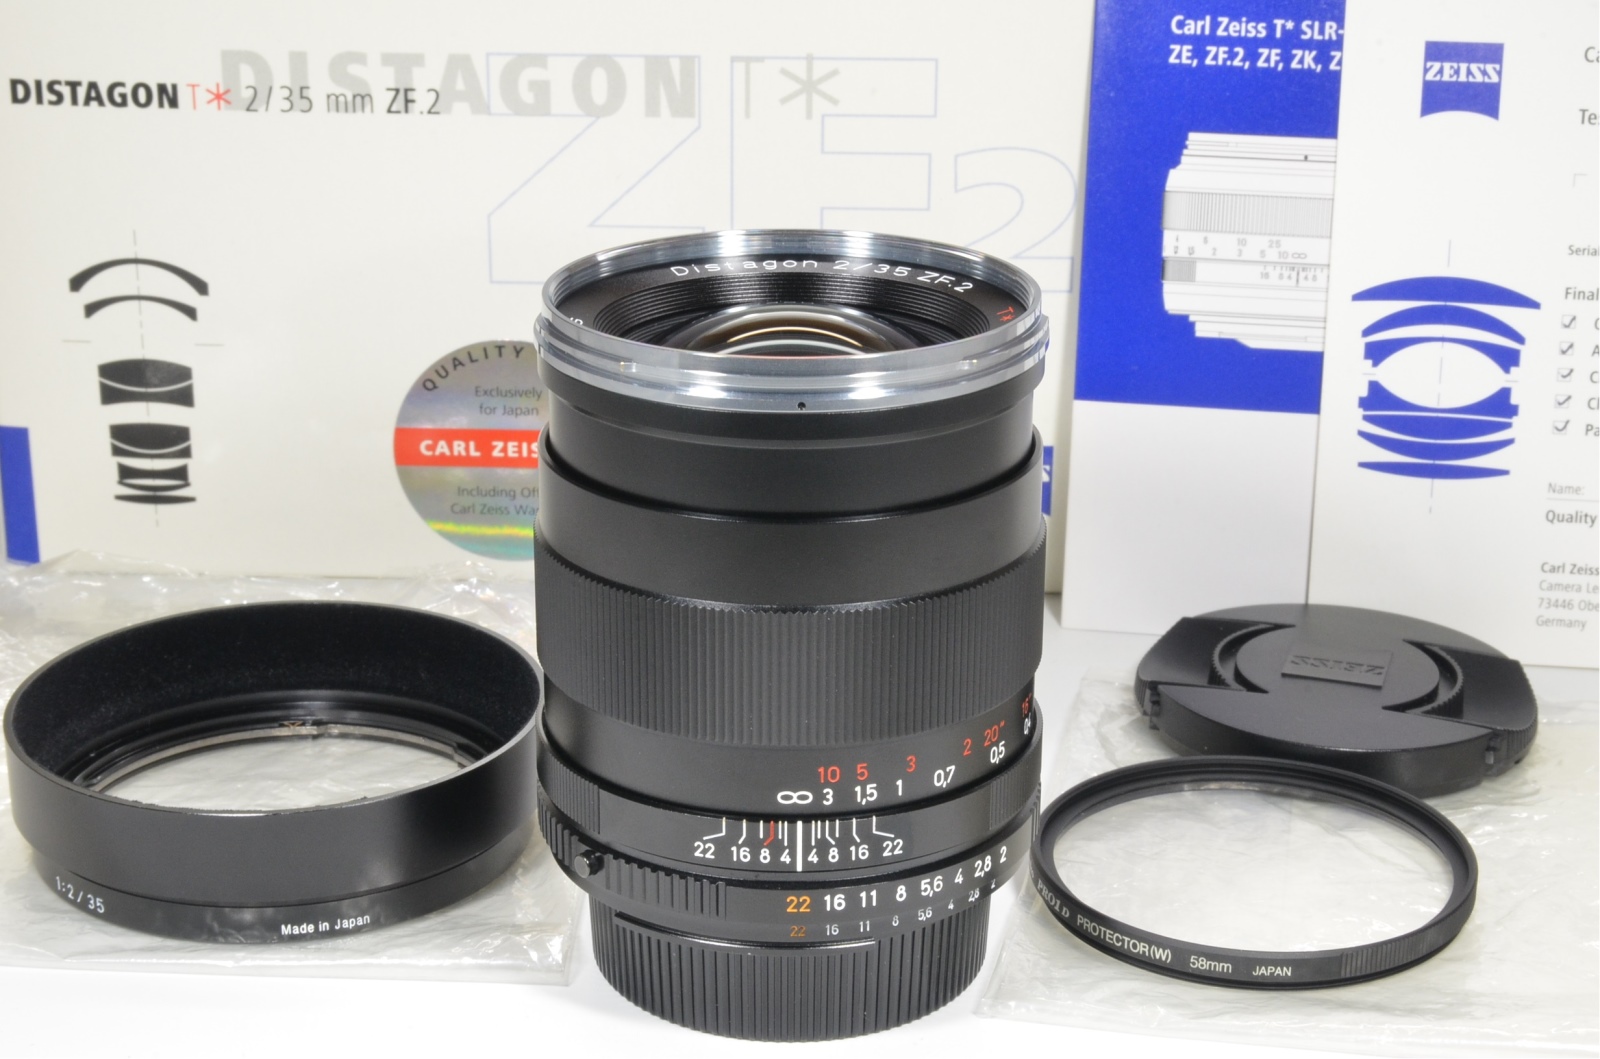 Carl Zeiss Distagon T* 35mm F2 ZF.2 for Nikon from Japan #a0786 